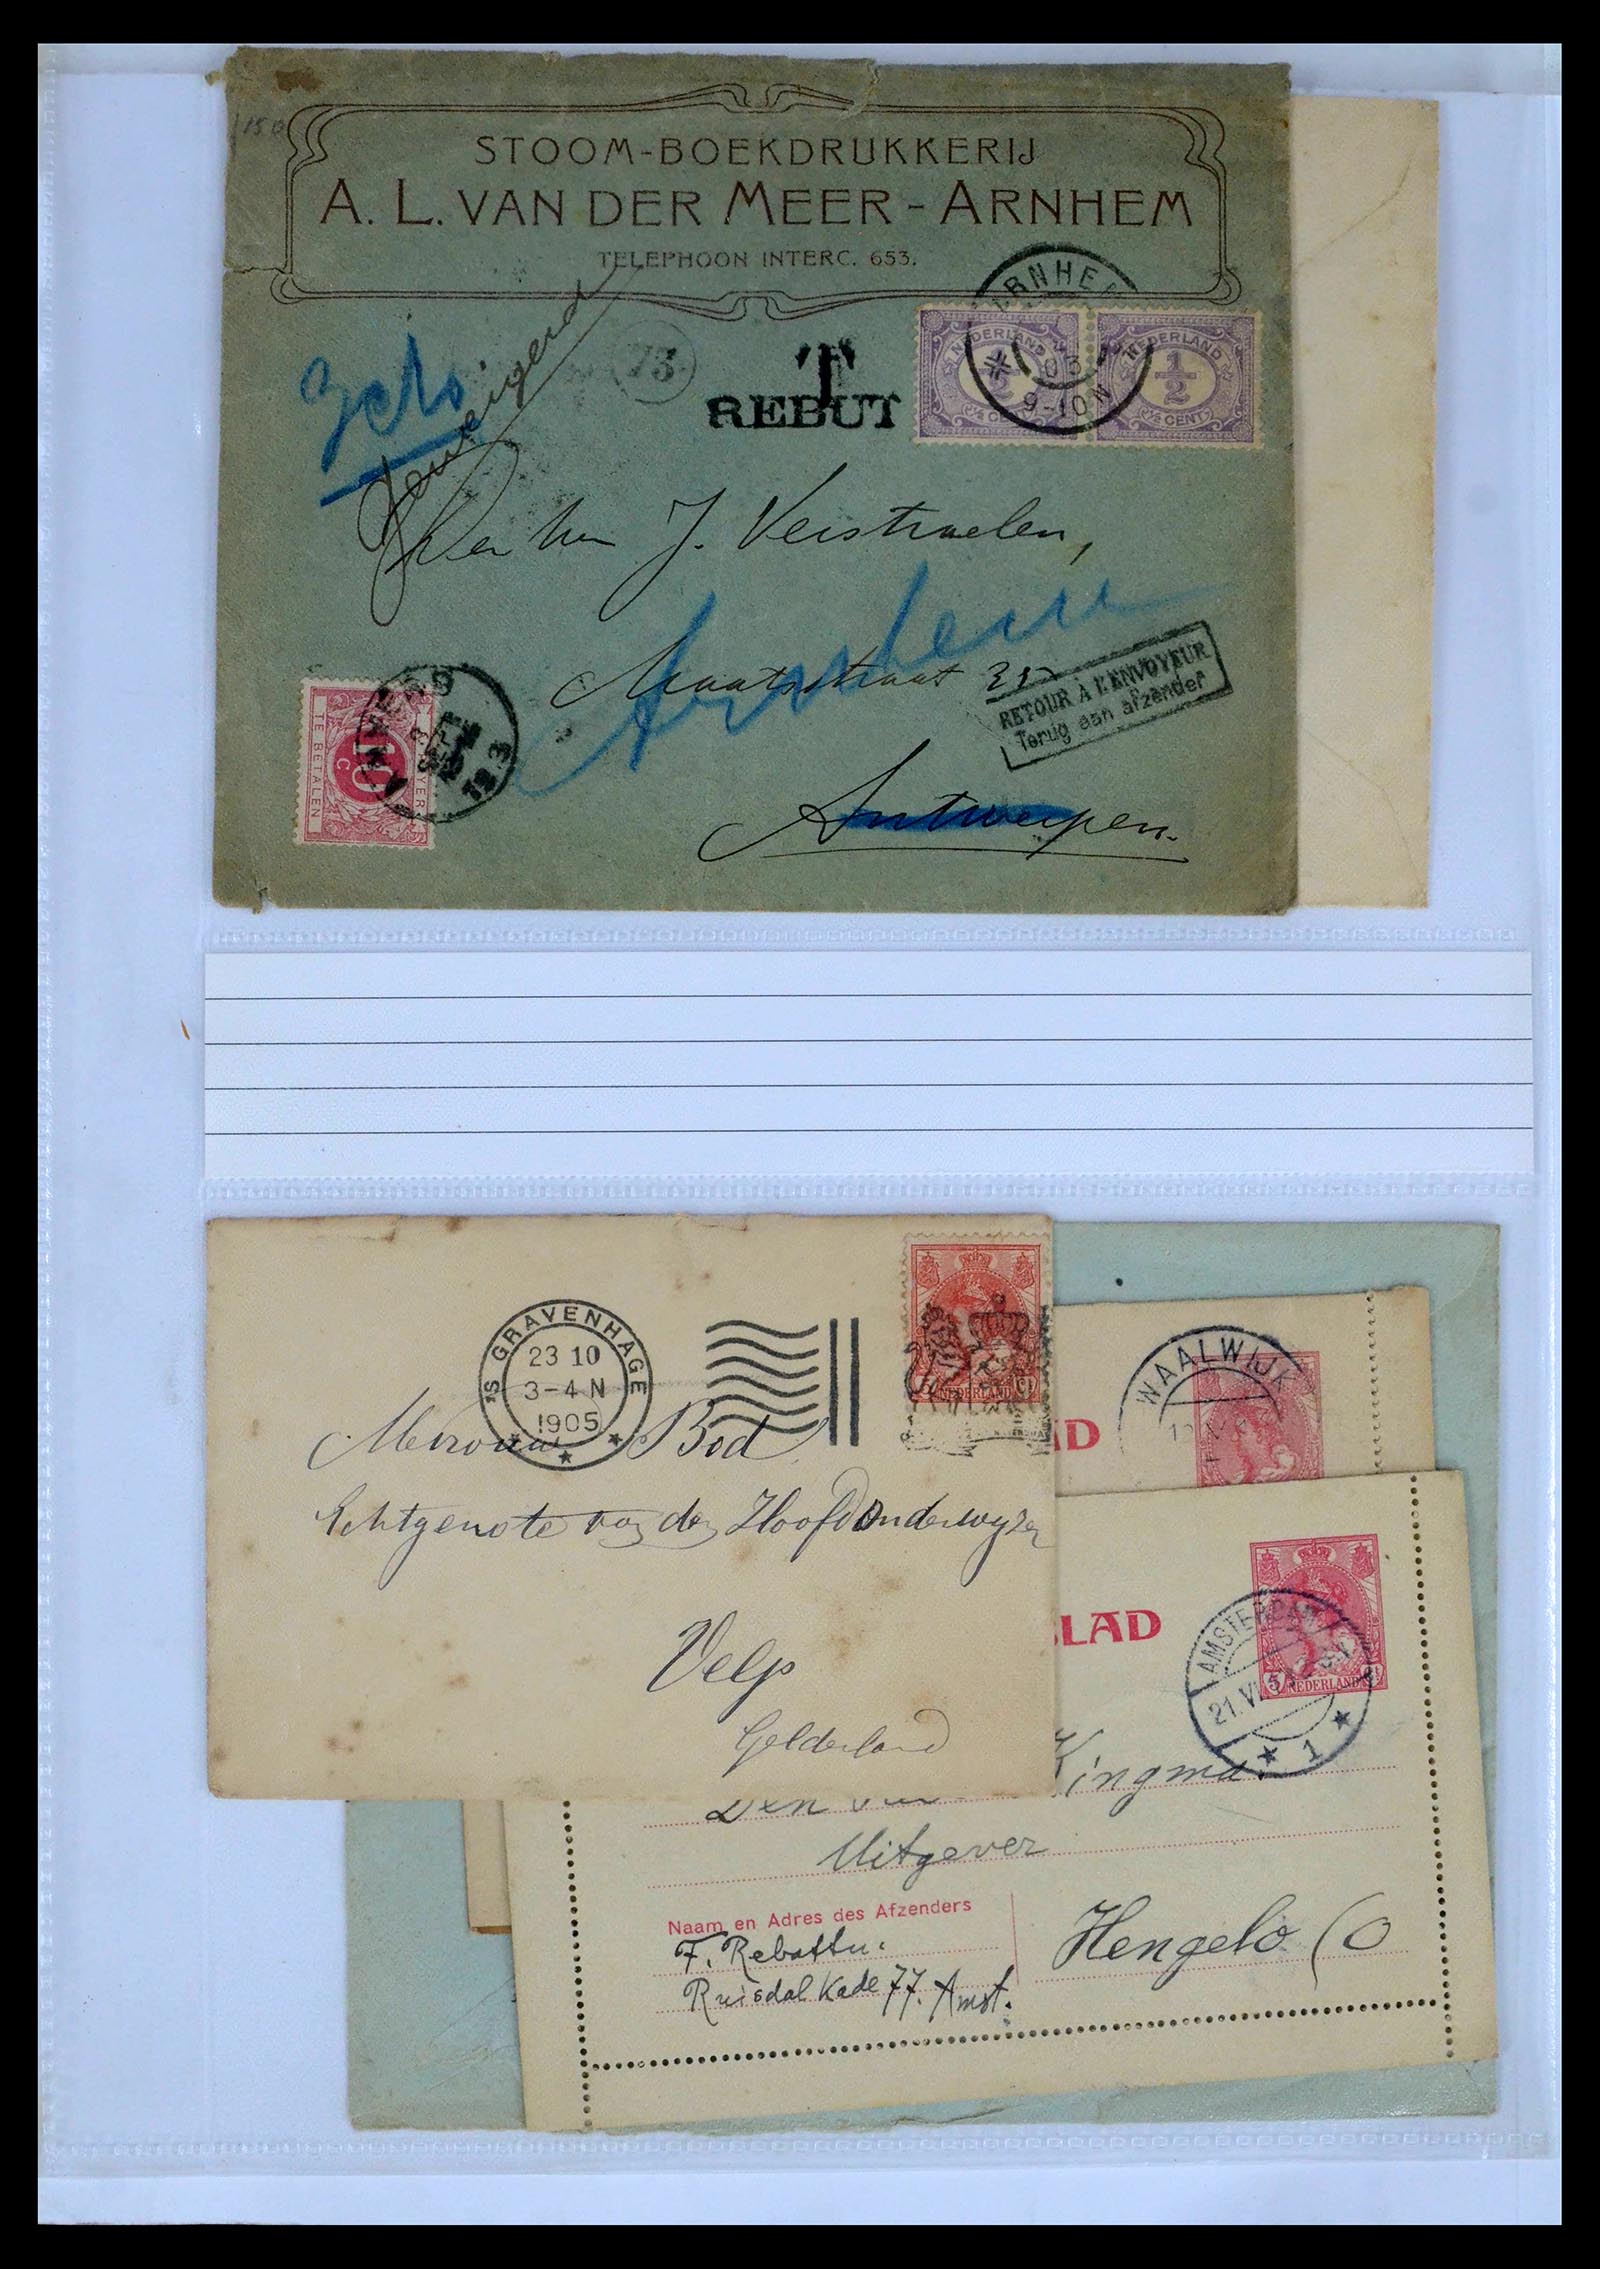 39429 0011 - Stamp collection 39429 Netherlands covers 1821-1955.